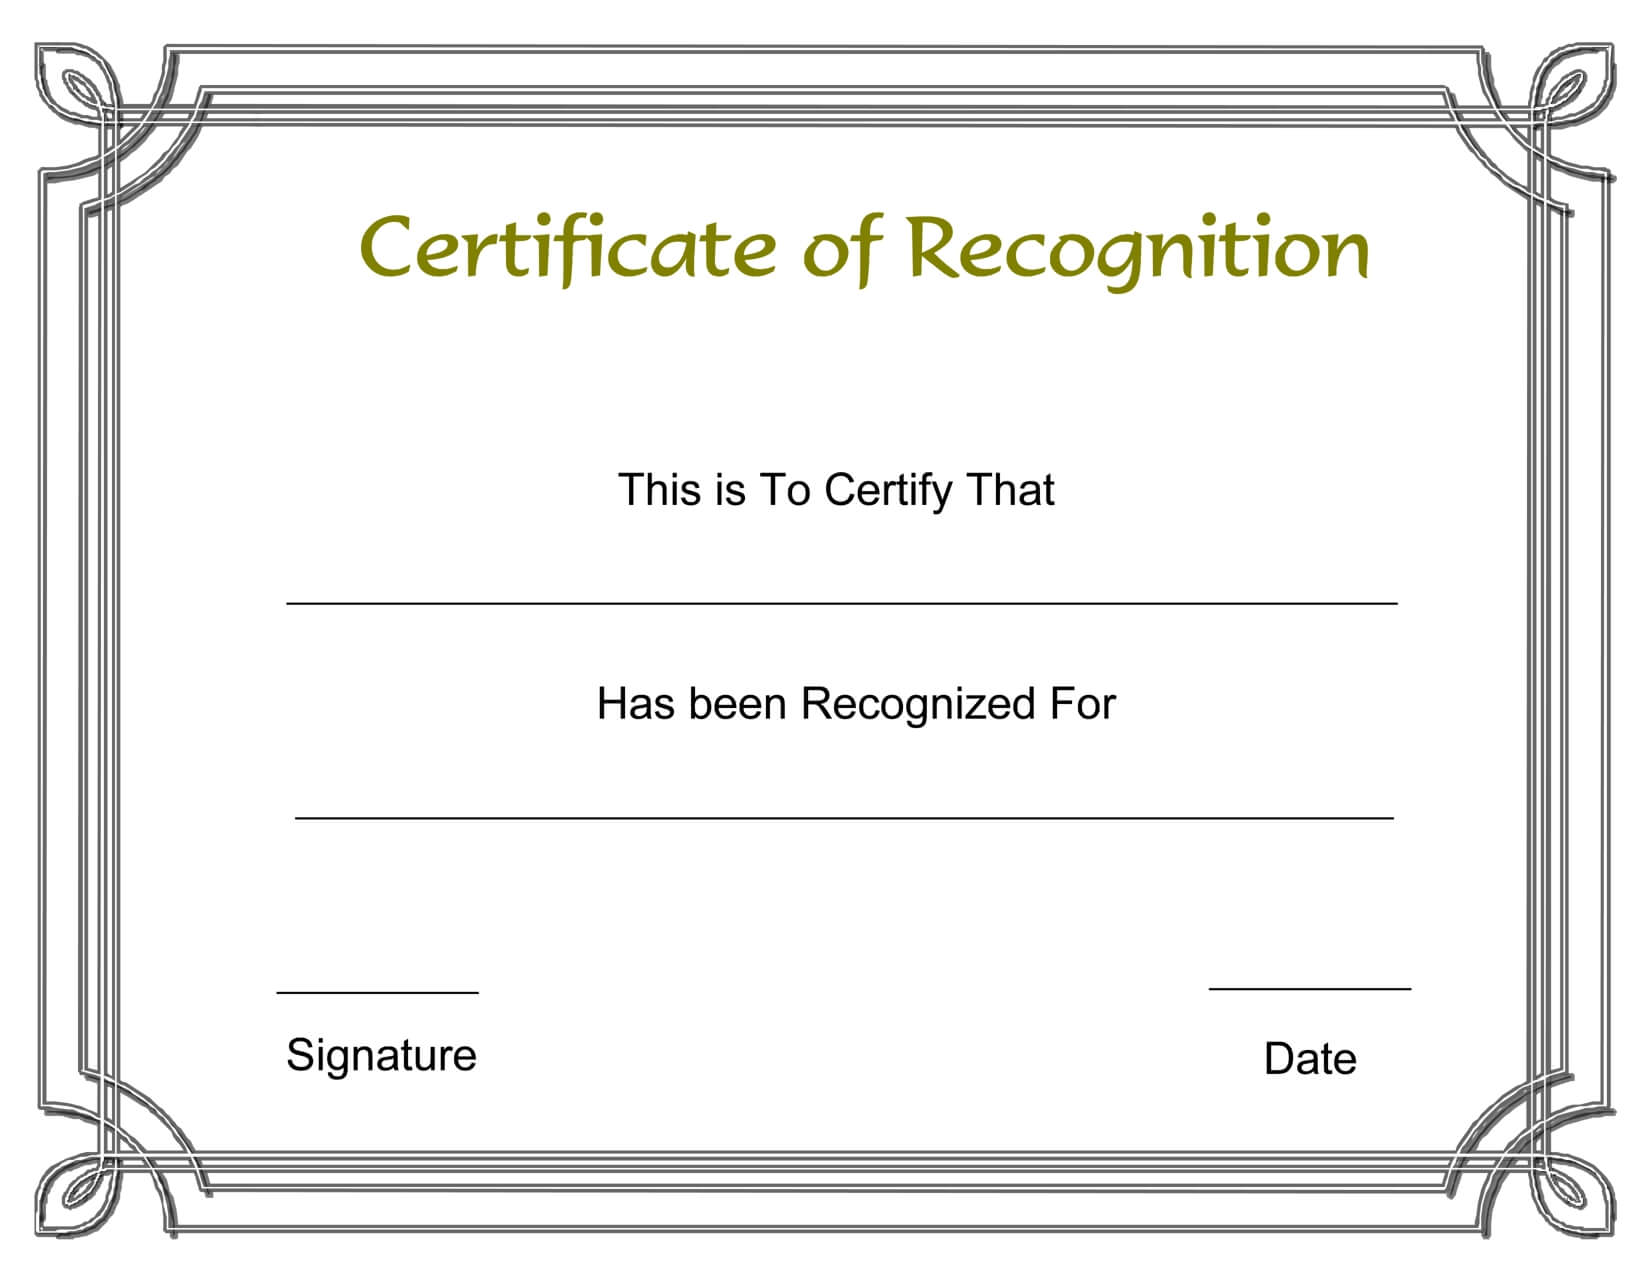 Certificate Template Recognition | Safebest.xyz Pertaining To Microsoft Word Award Certificate Template